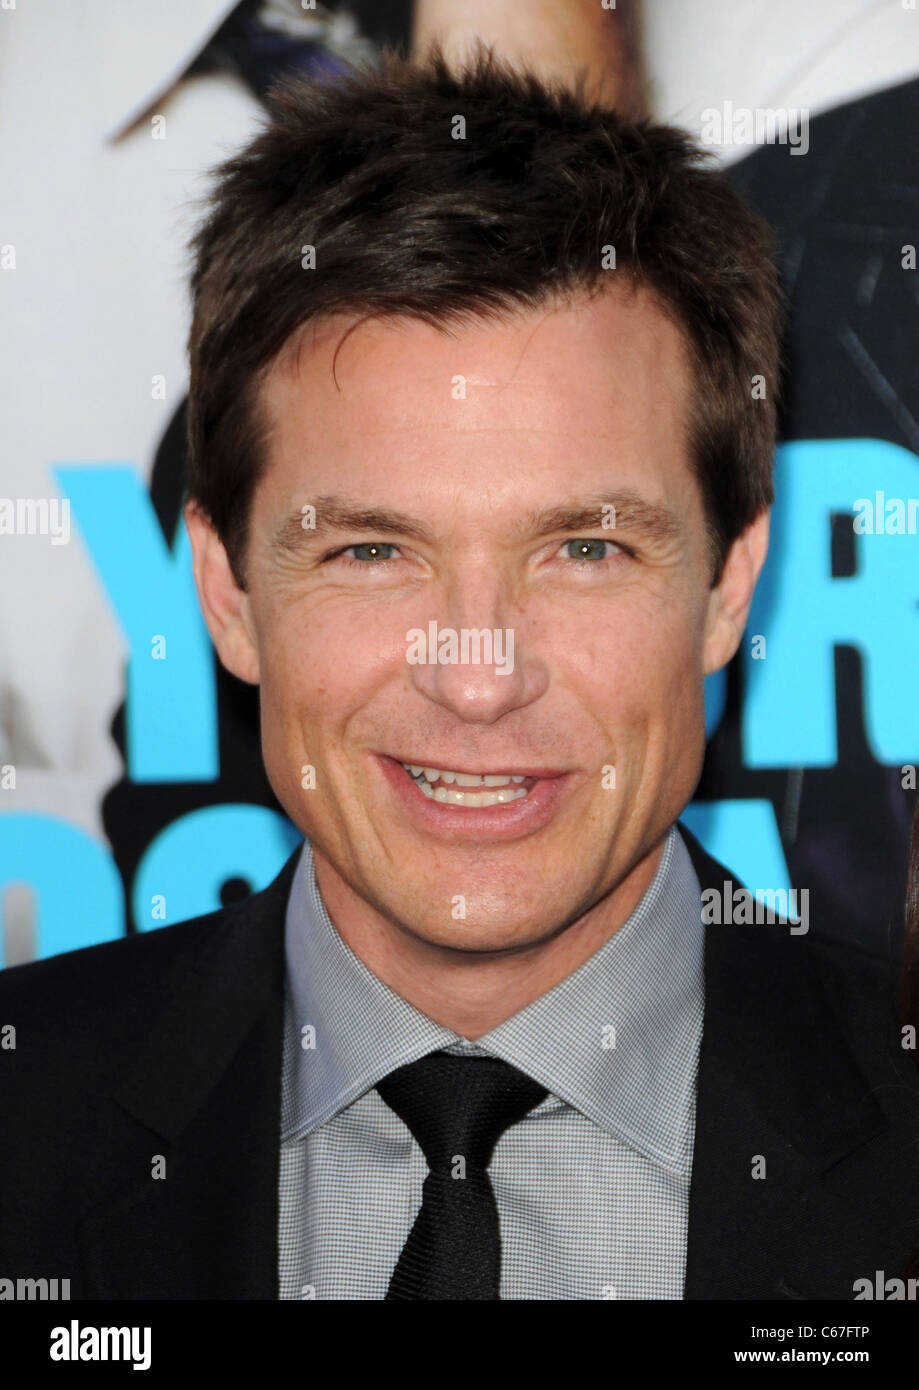 Jason Bateman at arrivals for HORRIBLE BOSSES Premiere, Grauman's Chinese Theatre, Los Angeles, CA June 30, 2011. Photo By: Dee Stock Photo